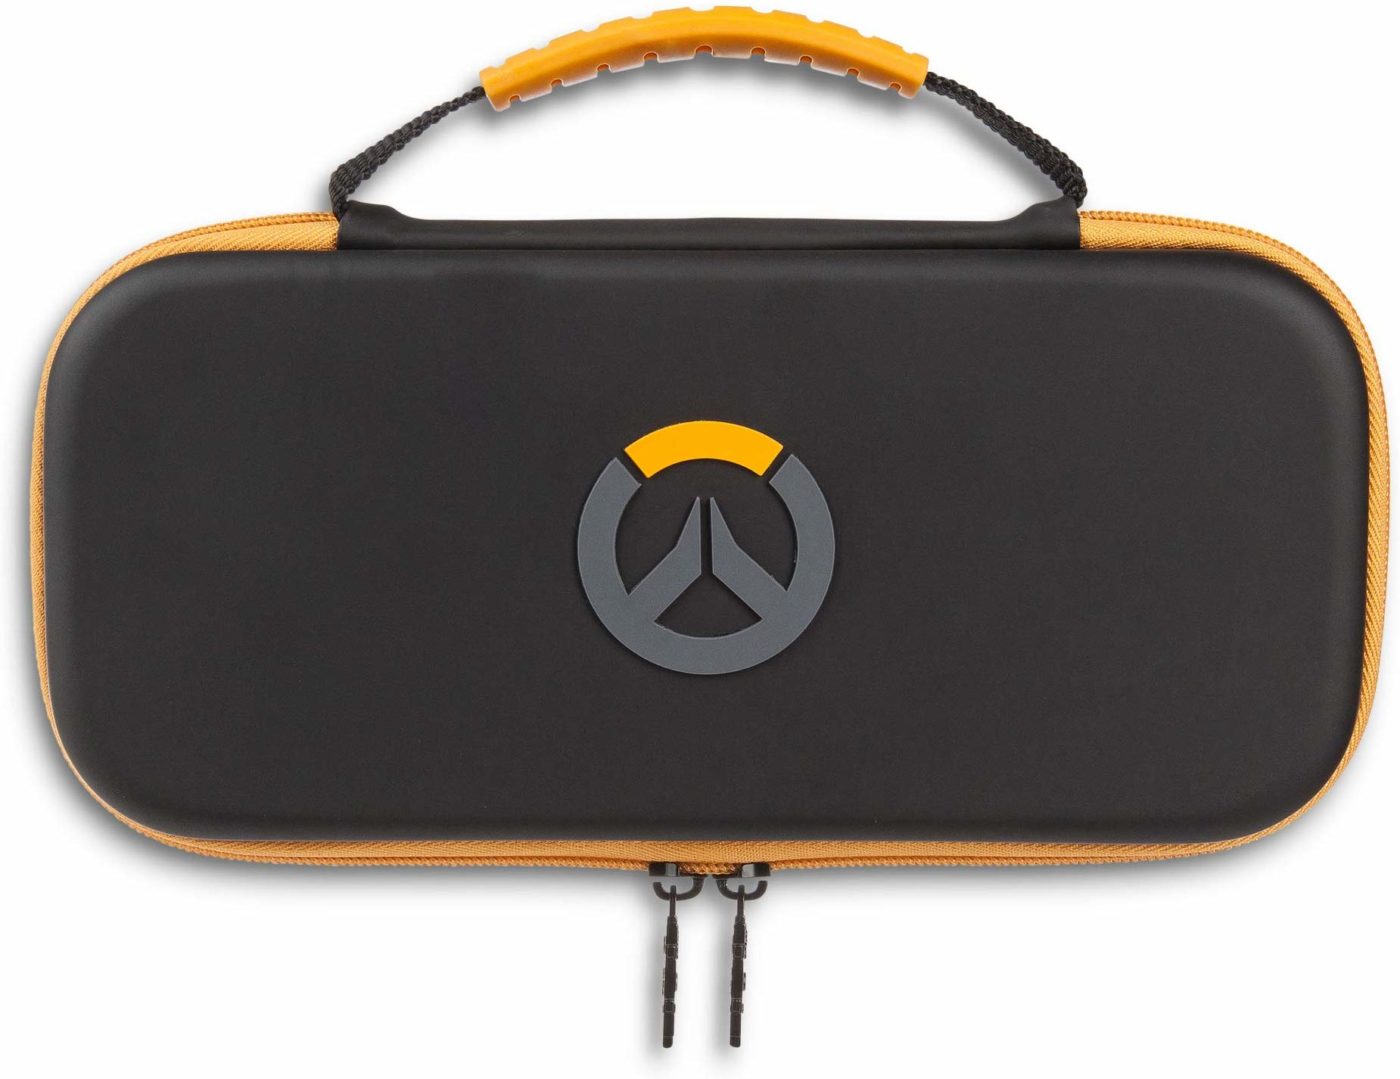 Overwatch-Nintendo-Switch-Case-Could-Indicate-That-a-Port-is-on-the-Way-1